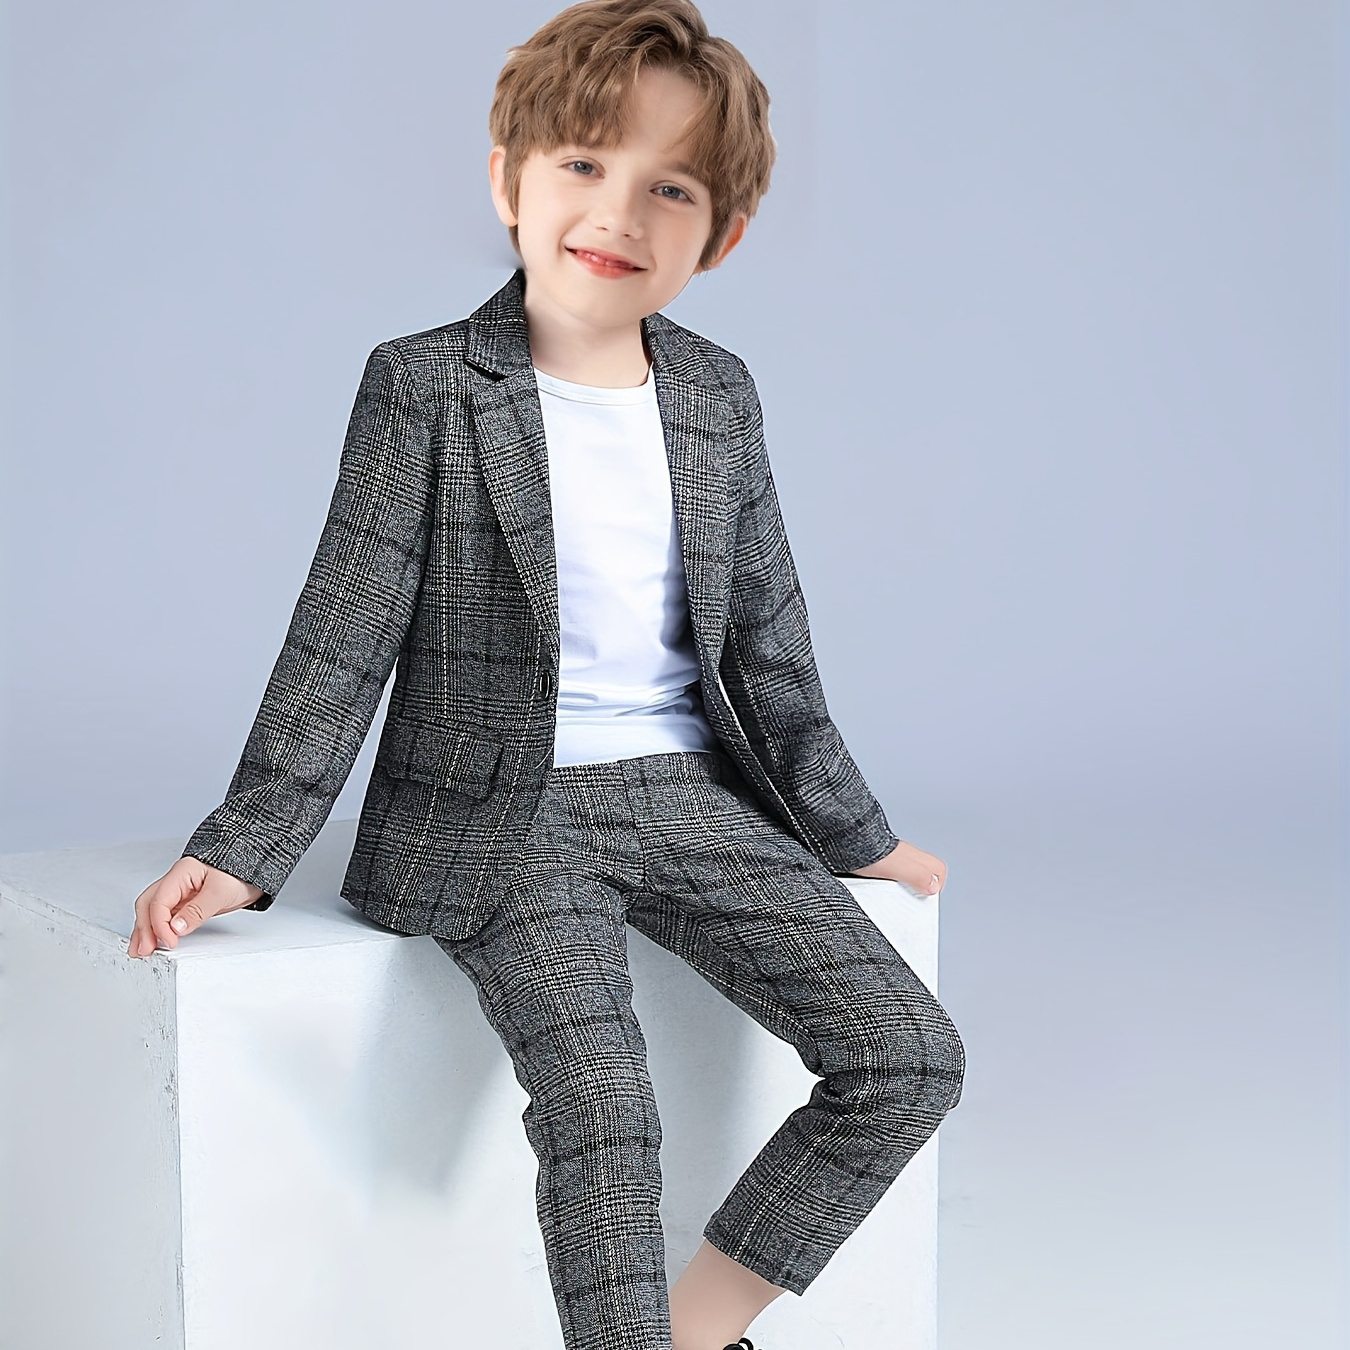 

2pcs Boy's Spring/winter Gentleman Outfit, Suit Jacket & Pants Set, Formal Wear For Speech Performance Birthday Party, Kid's Clothes